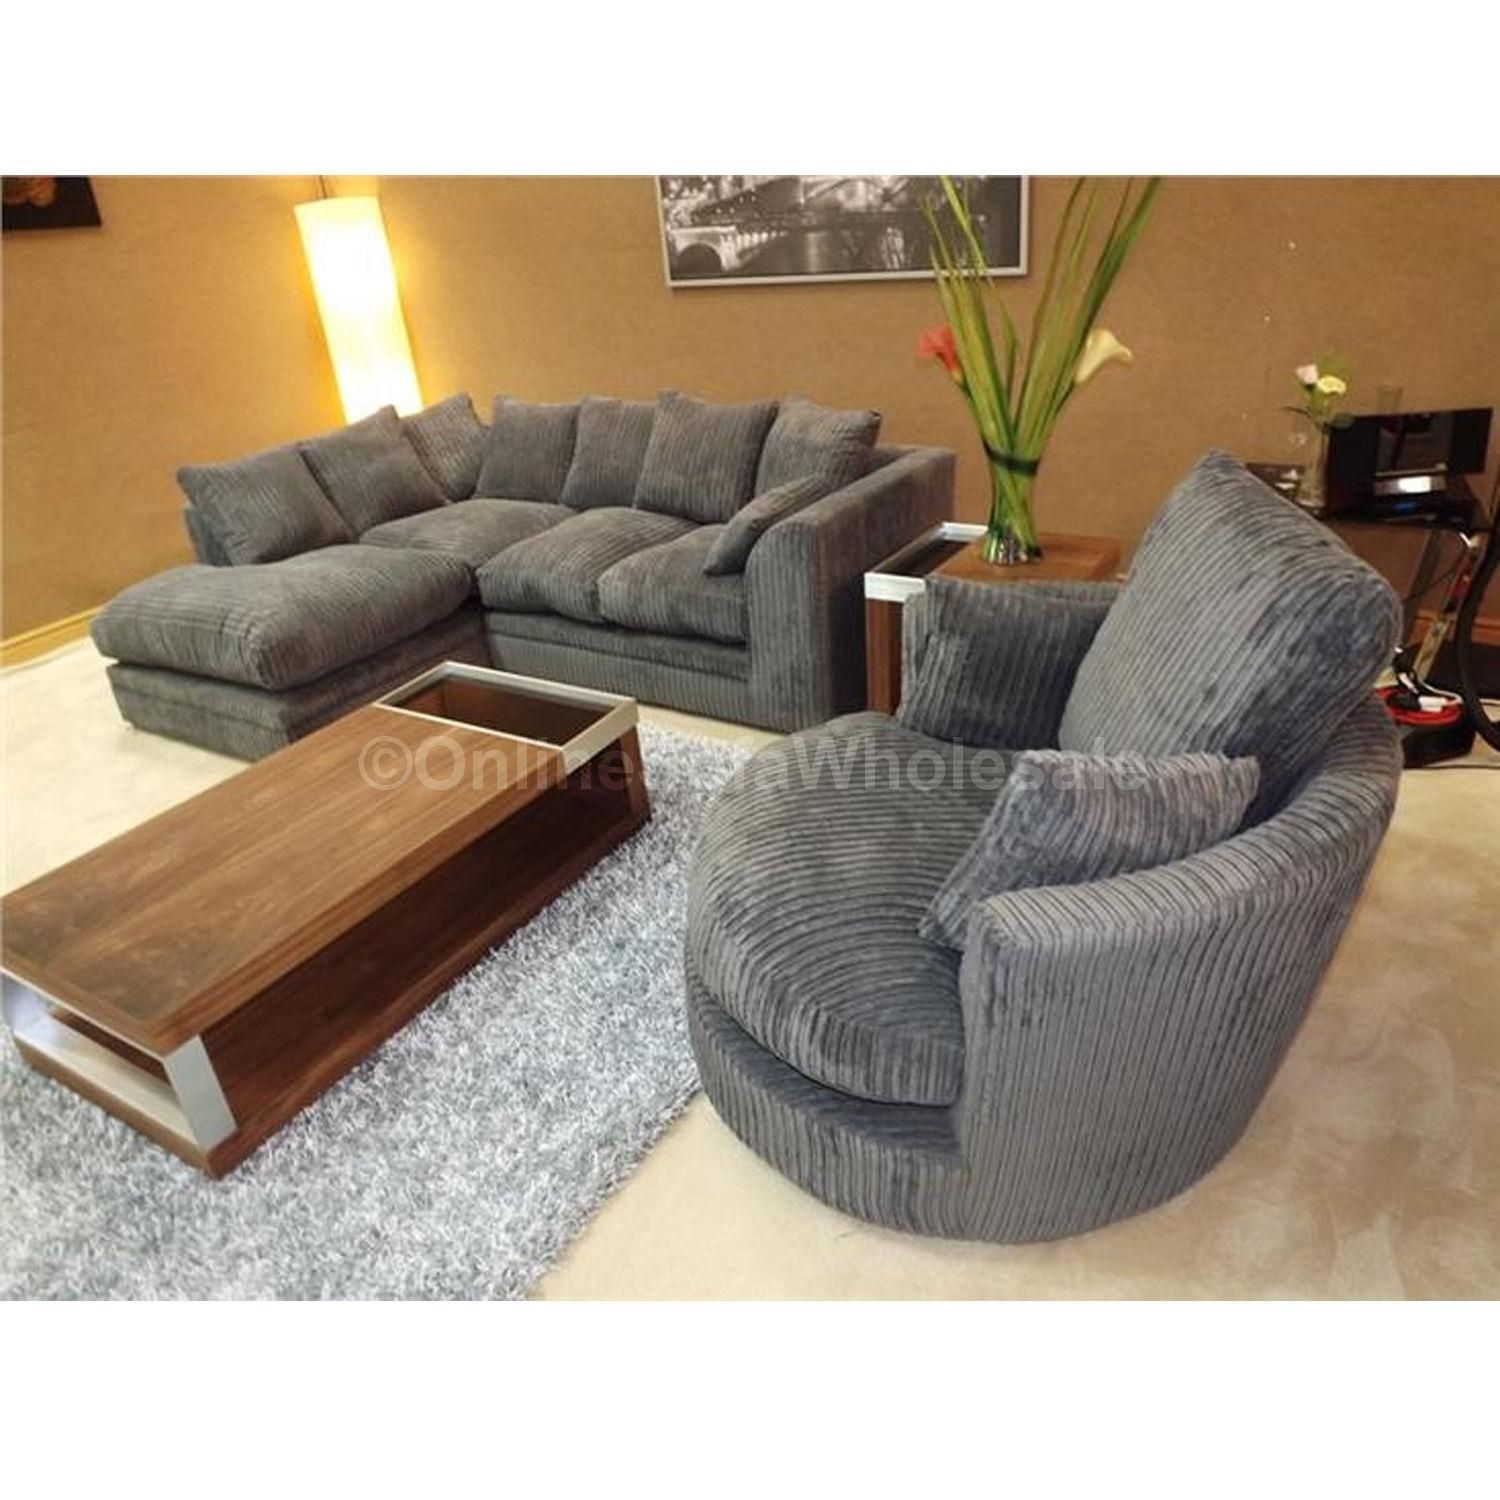 Sofas : Awesome Swivel Sofa Chair Oversized Round Swivel Chair Intended For Chair Sofas (View 19 of 22)